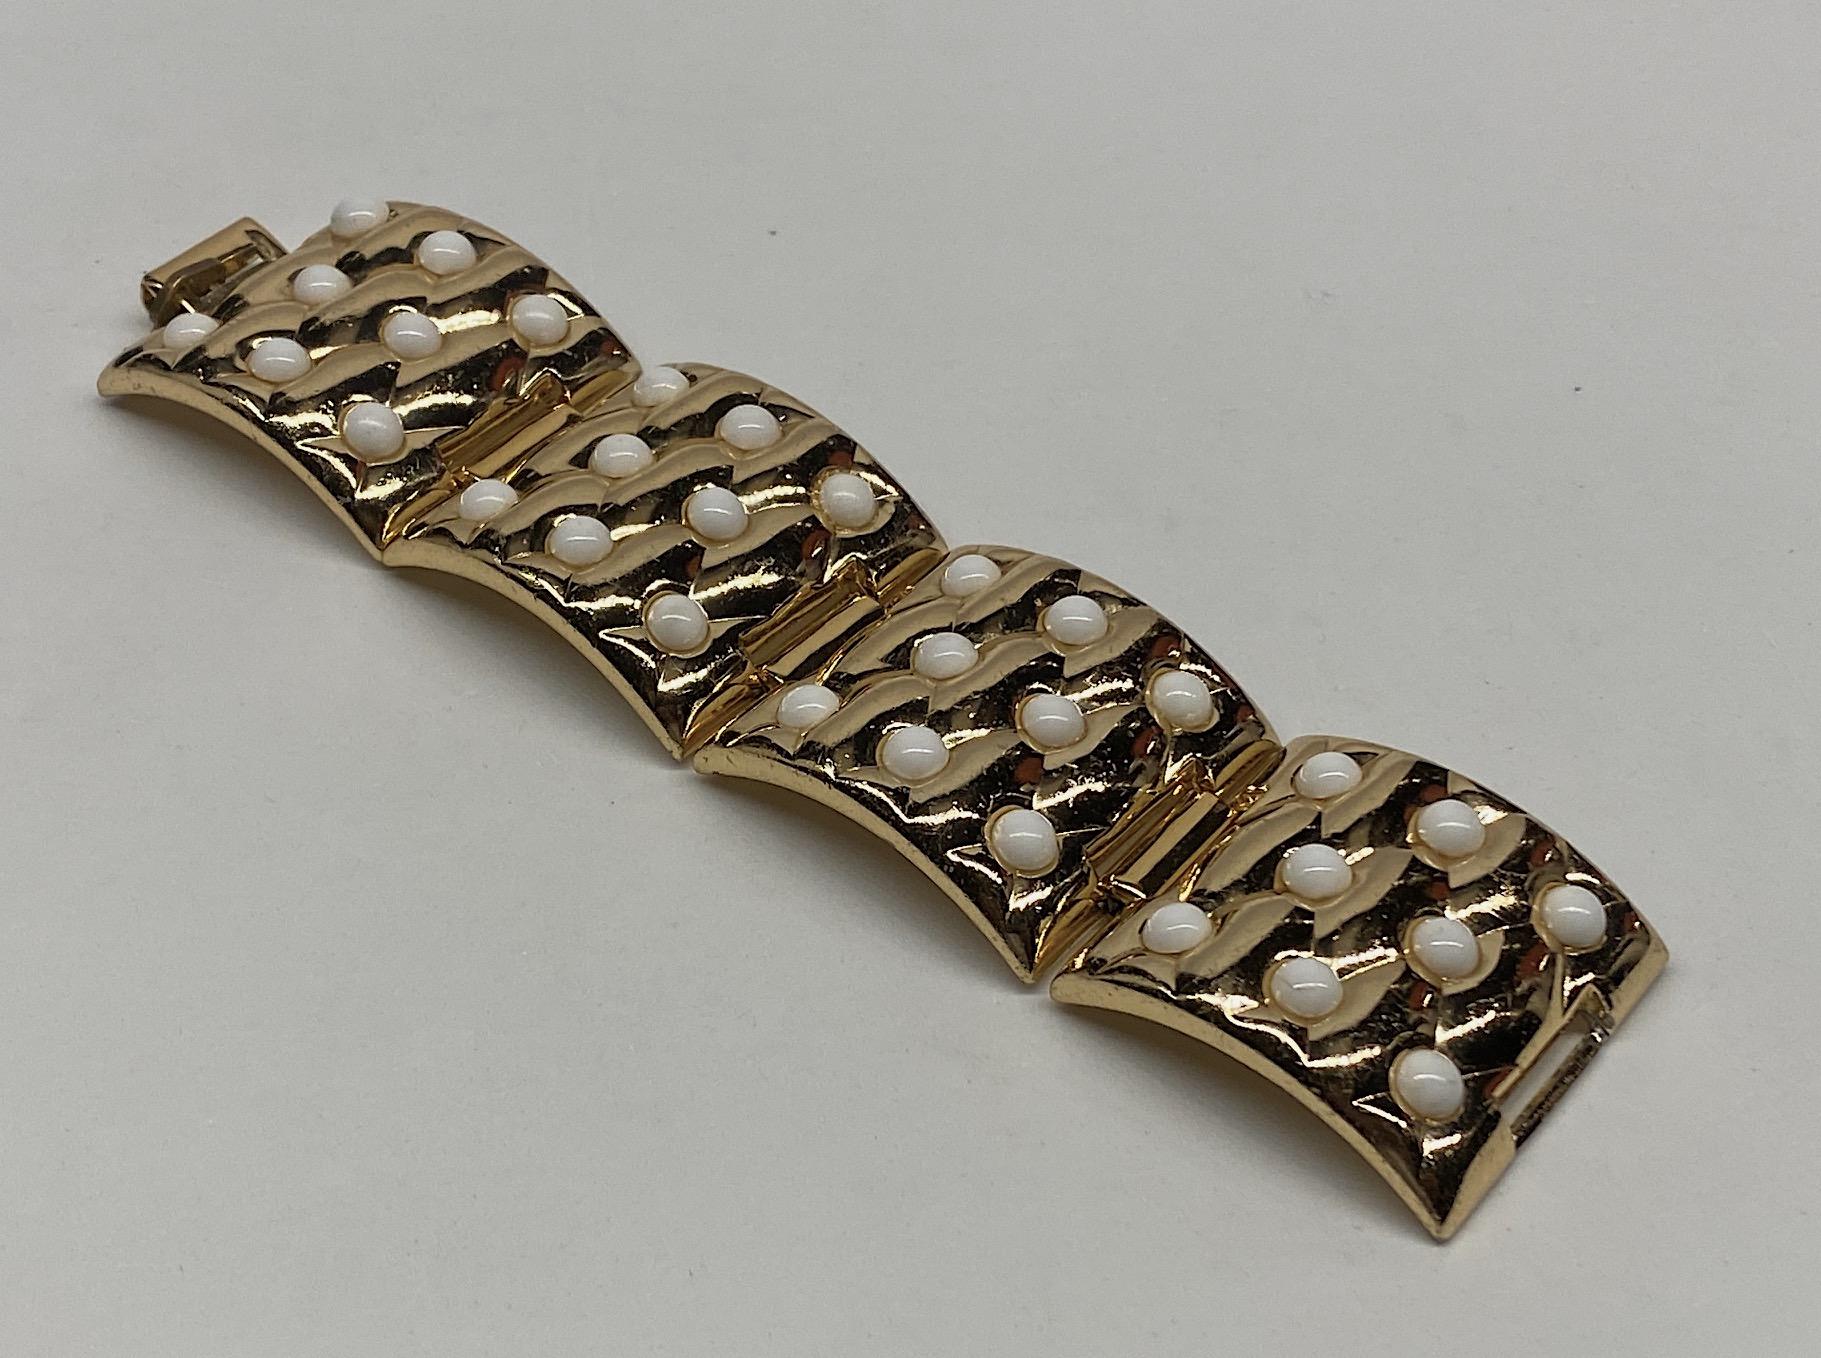 A vintage 1950s wide four panel bracelet by French fashion jewelry company Oranium in Paris. Each of the four panels have a diamond pattern quilt design set with white glass cabochon. Additionally, the panel links are curved so the bracelet will fit